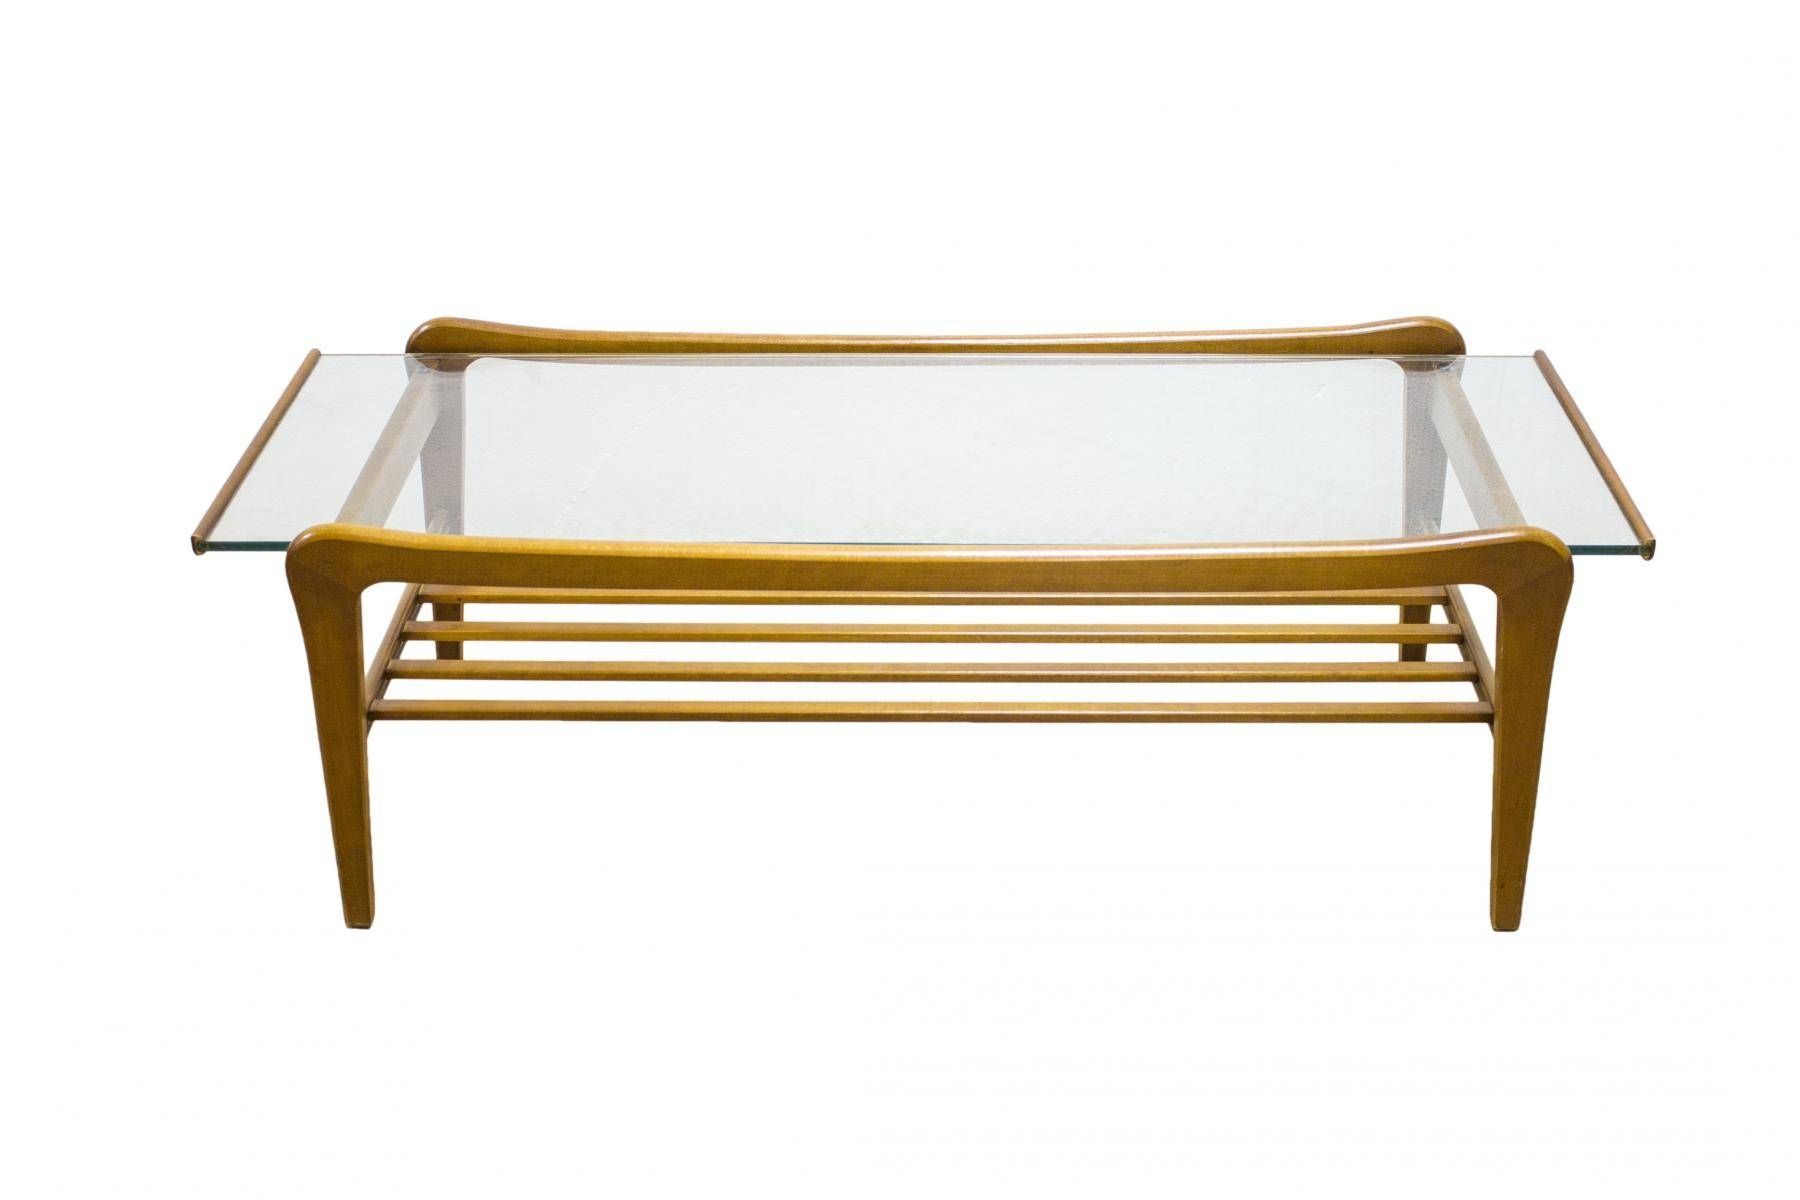 Danish Teak And Glass Coffee Table With Magazine Shelf For Sale At Throughout Retro Teak Glass Coffee Tables (View 28 of 30)